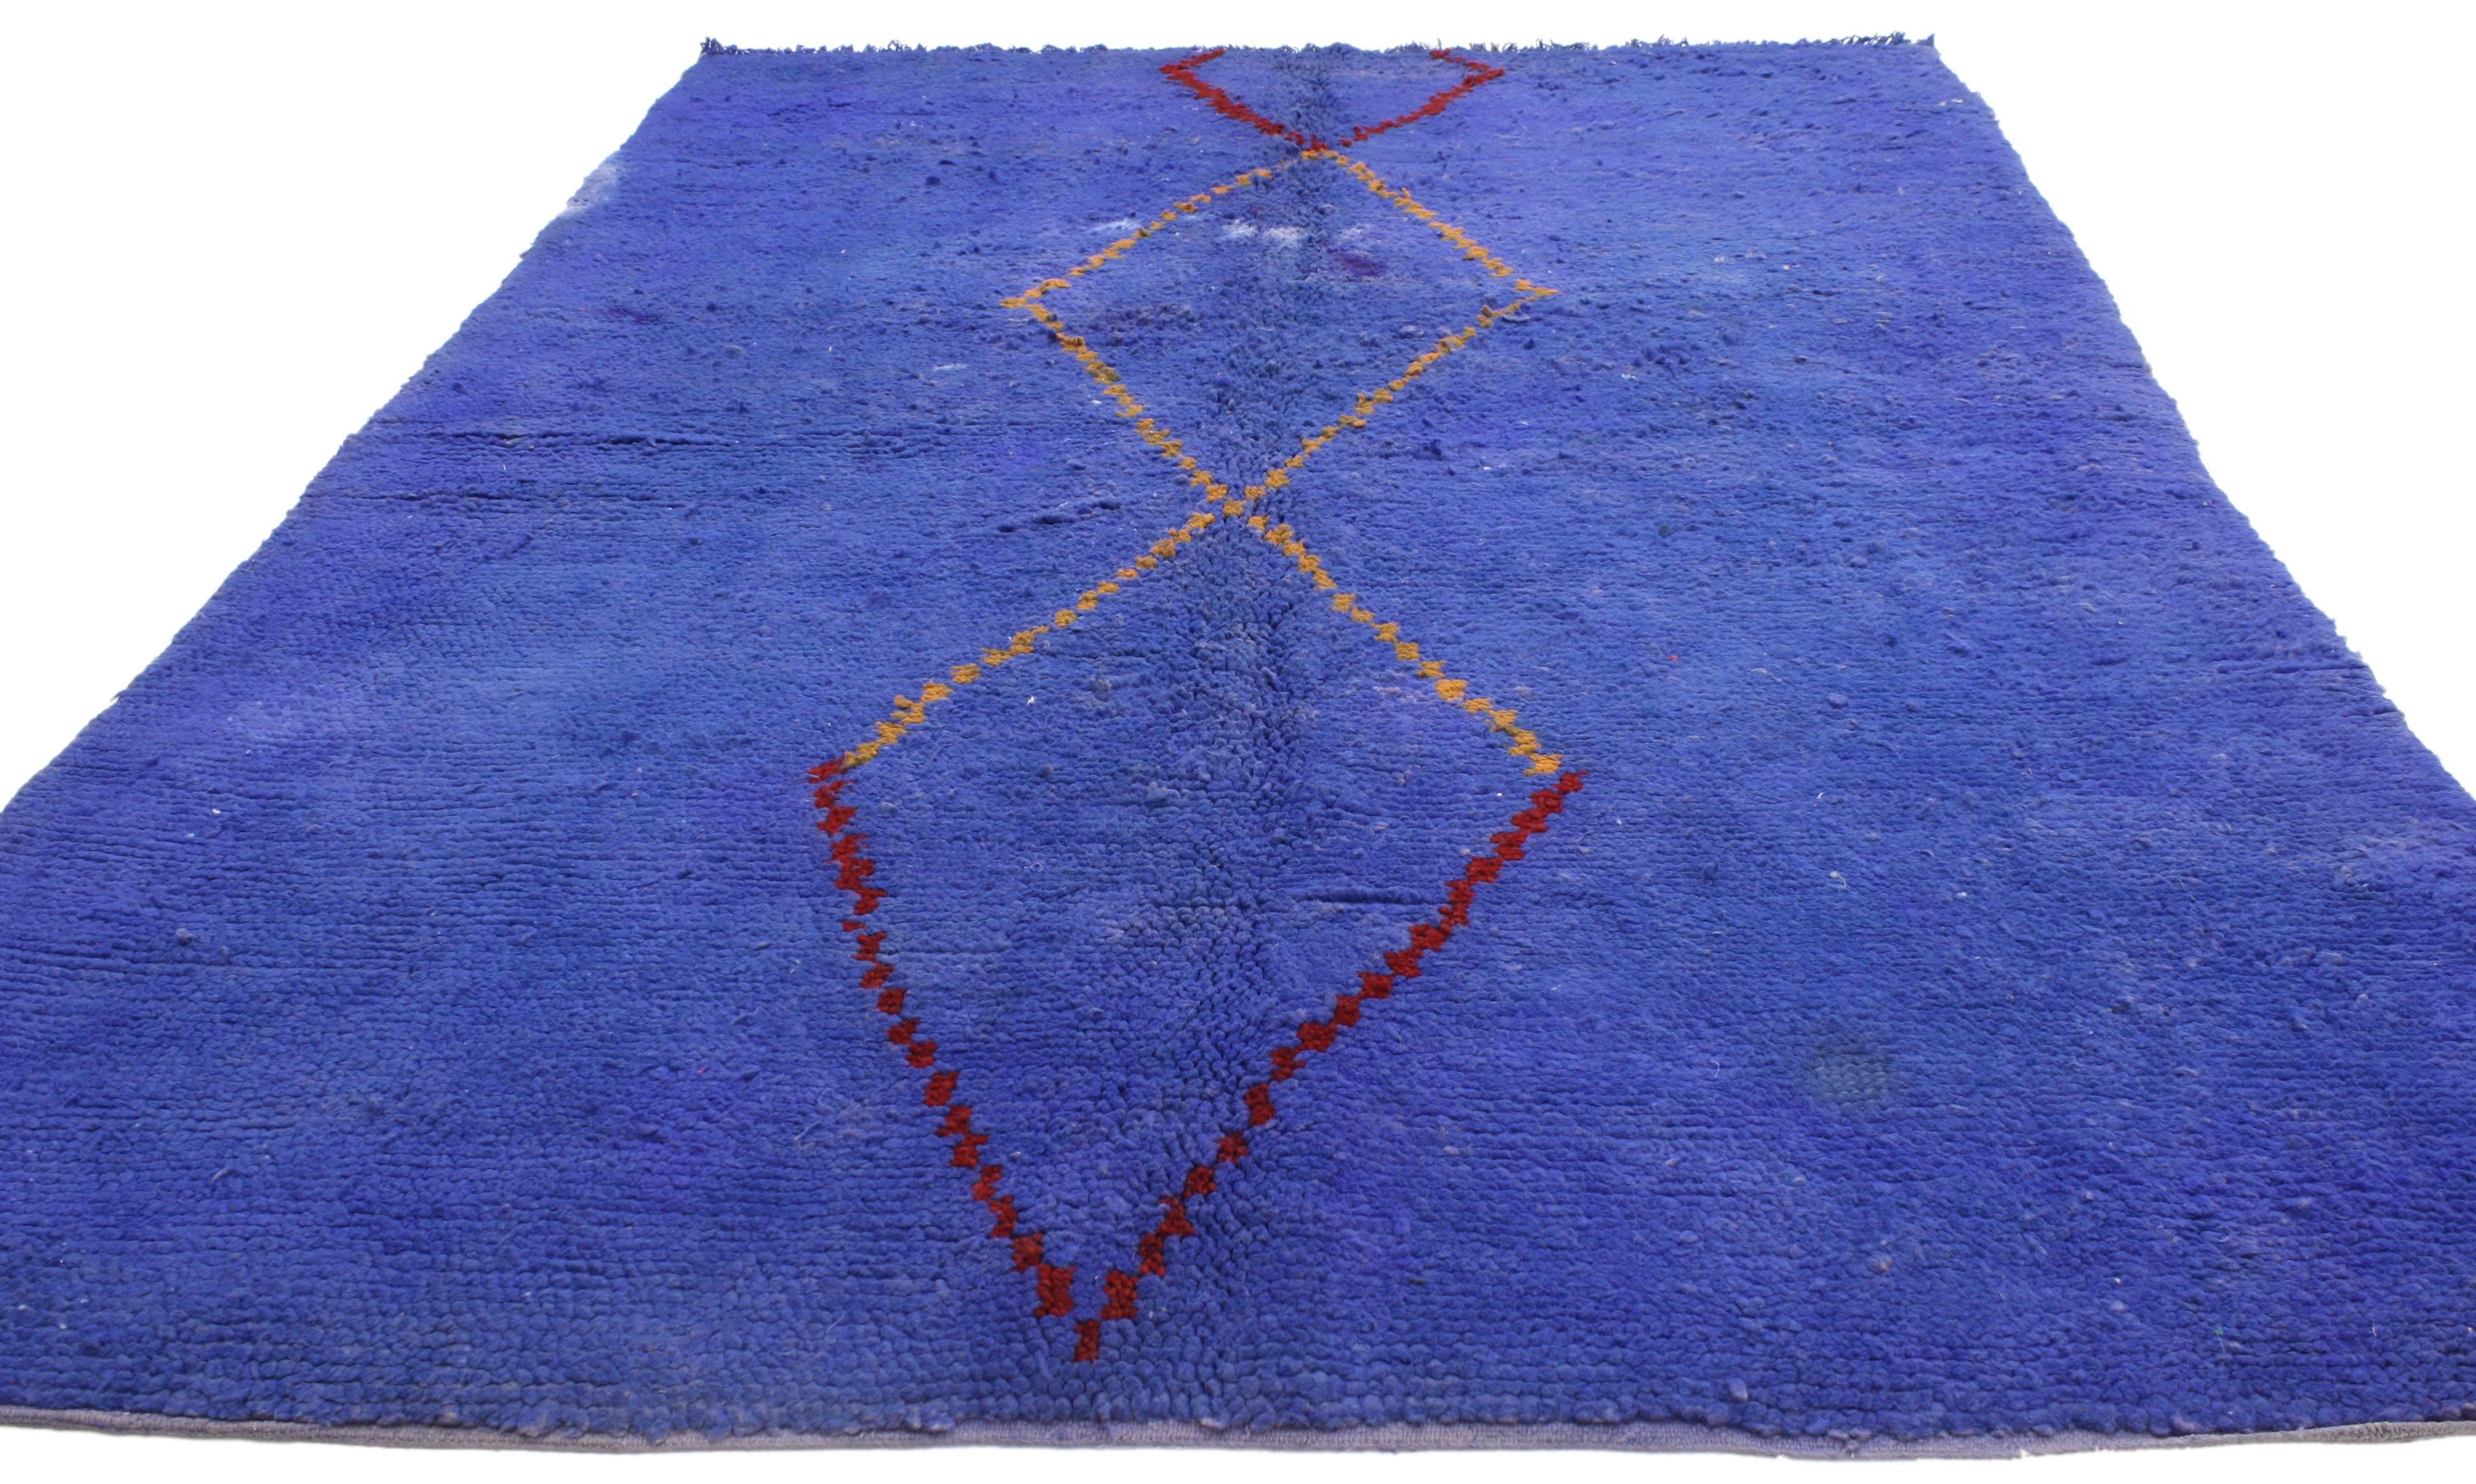 20585 blue vintage Berber Moroccan rug with modern tribal style. Saturated in an extraordinary palette of blue, this vintage Berber Moroccan rug showcases a modern tribal style. The beautifully composed stacked diamond motifs along the center create